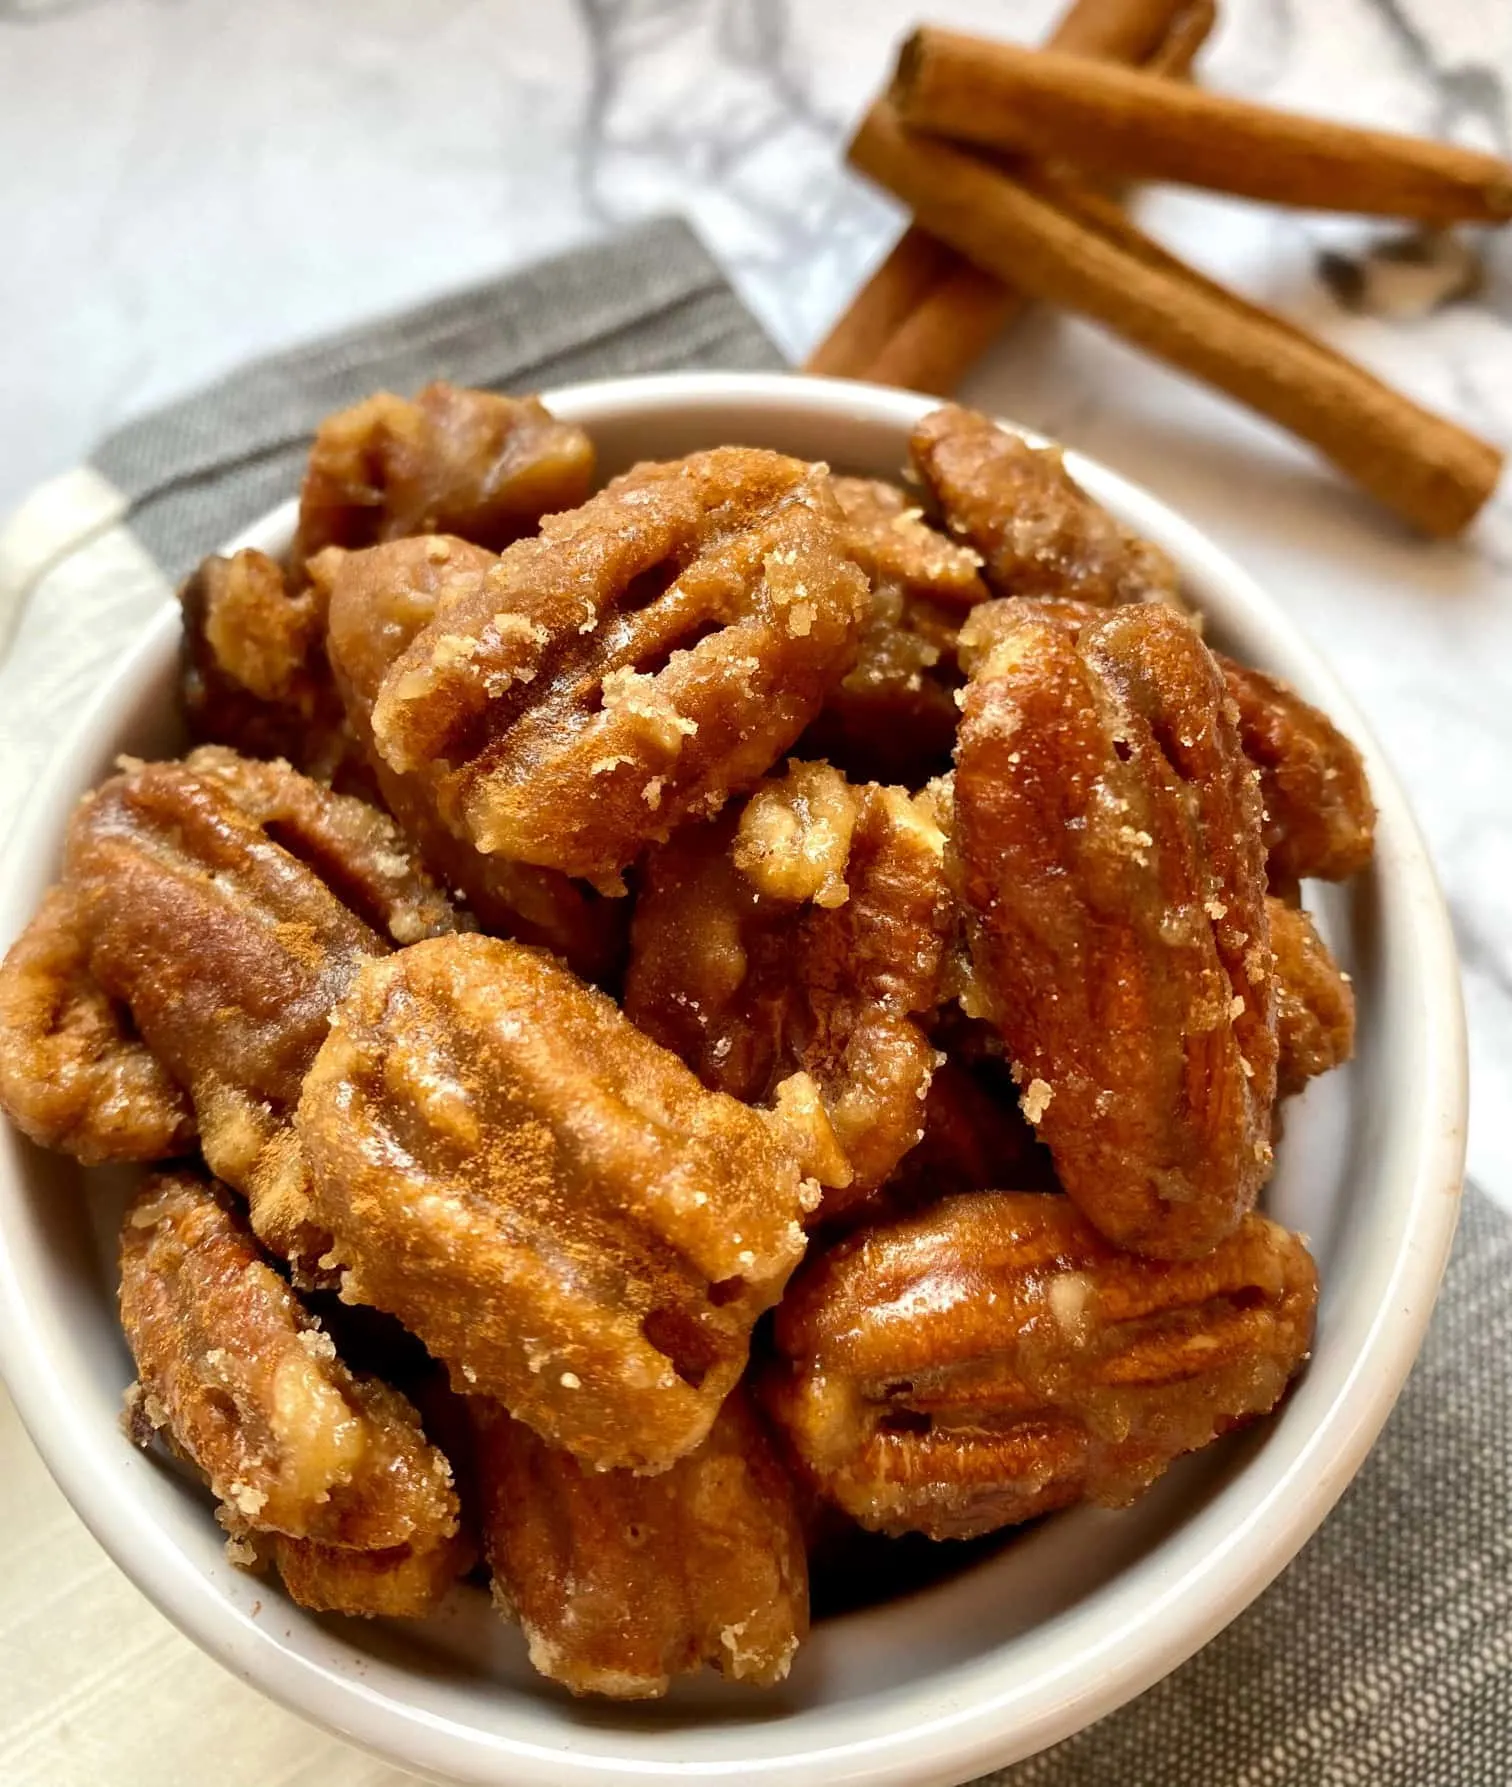 A bowl of candied pecans next to cinnamon sticks.